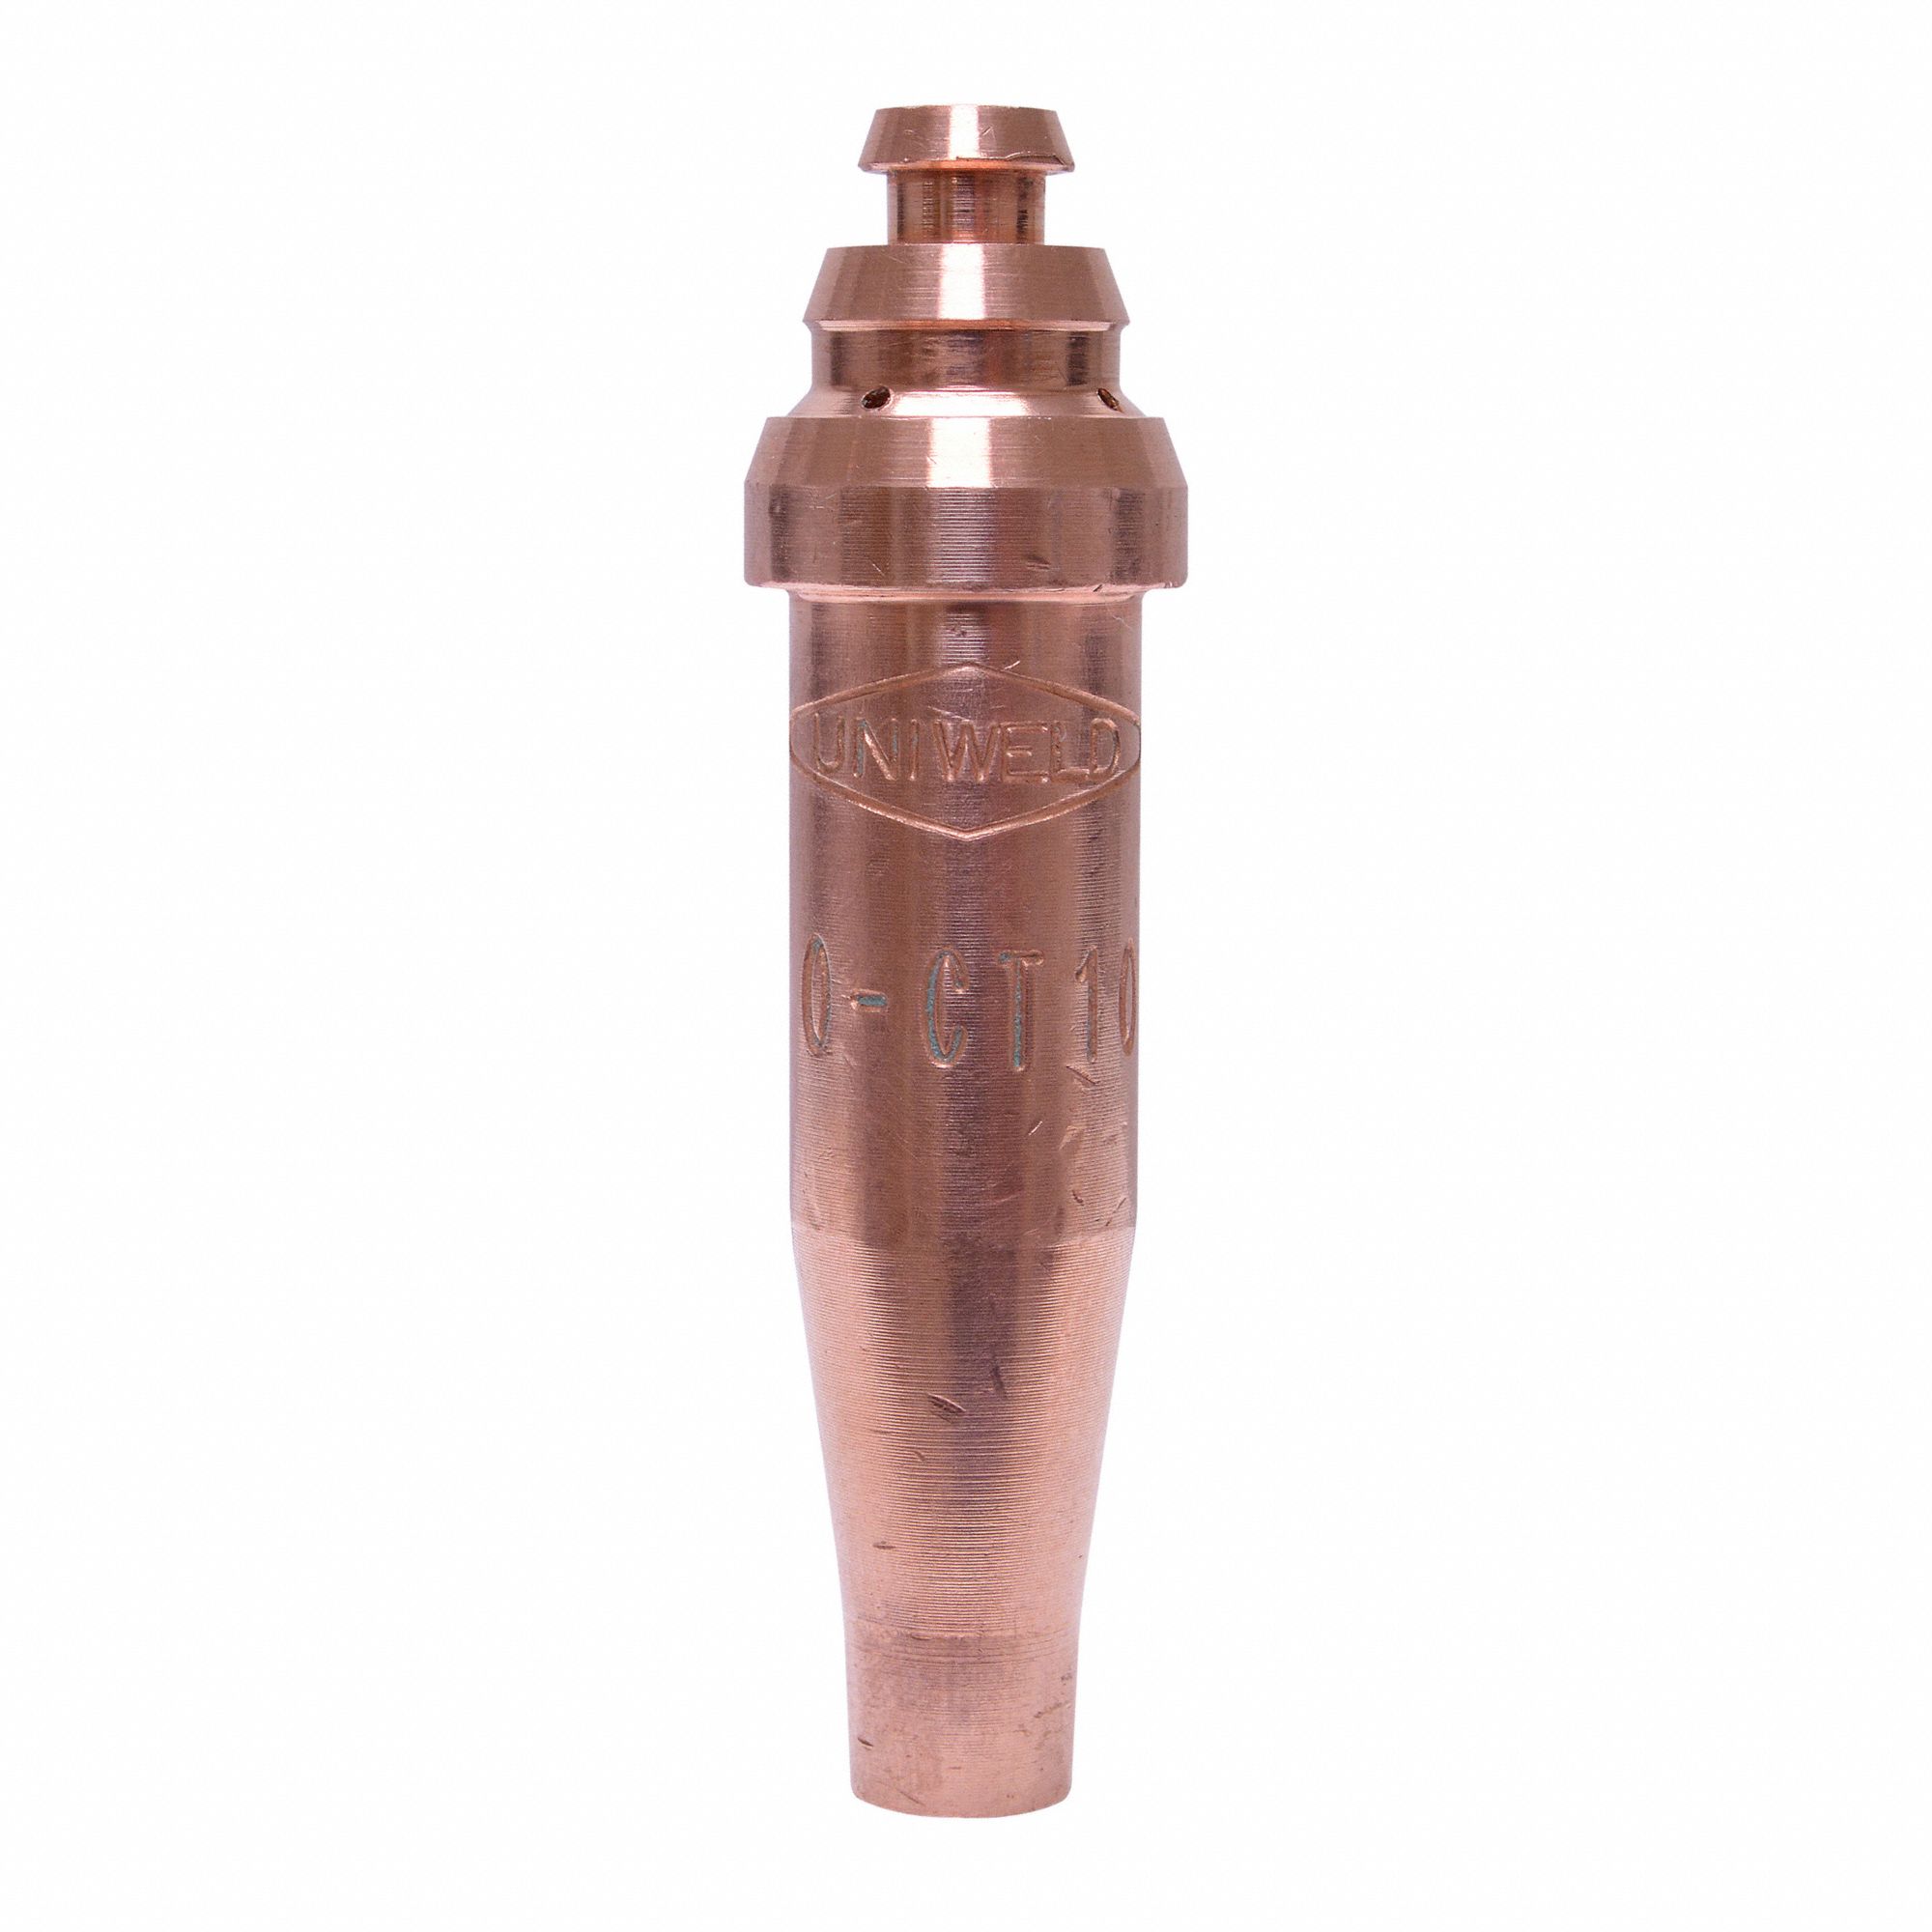 CUTTING TIP, ACETYLENE, 20 TO 25 PSIG OXYGEN/5 PSIG ACETYLENE, CUTS 1/2 IN METAL, TIP SIZE 0